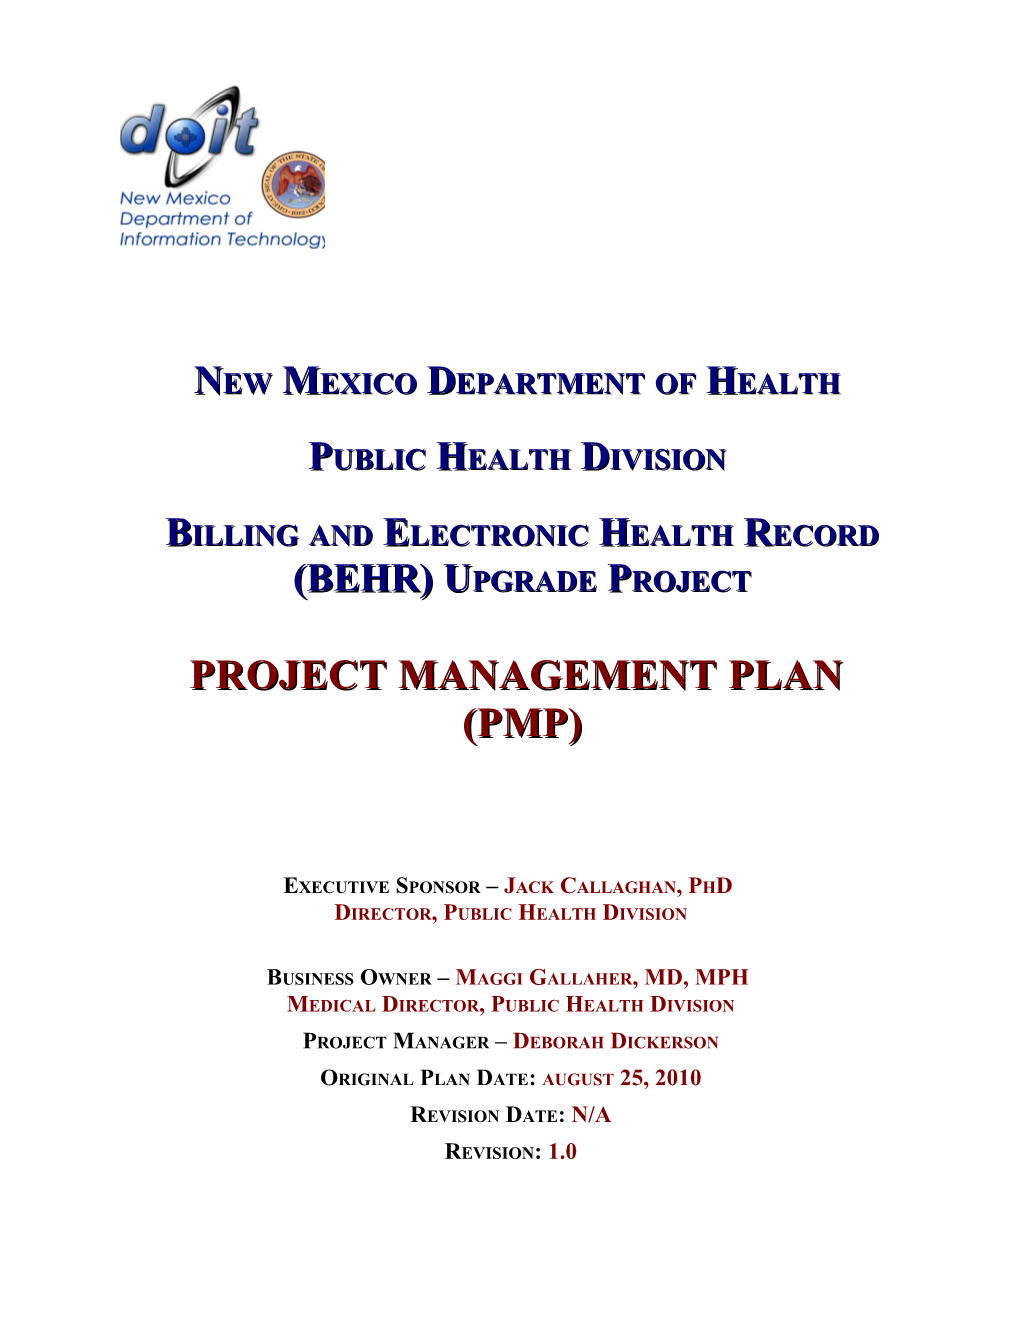 New Mexico Department of Health s1